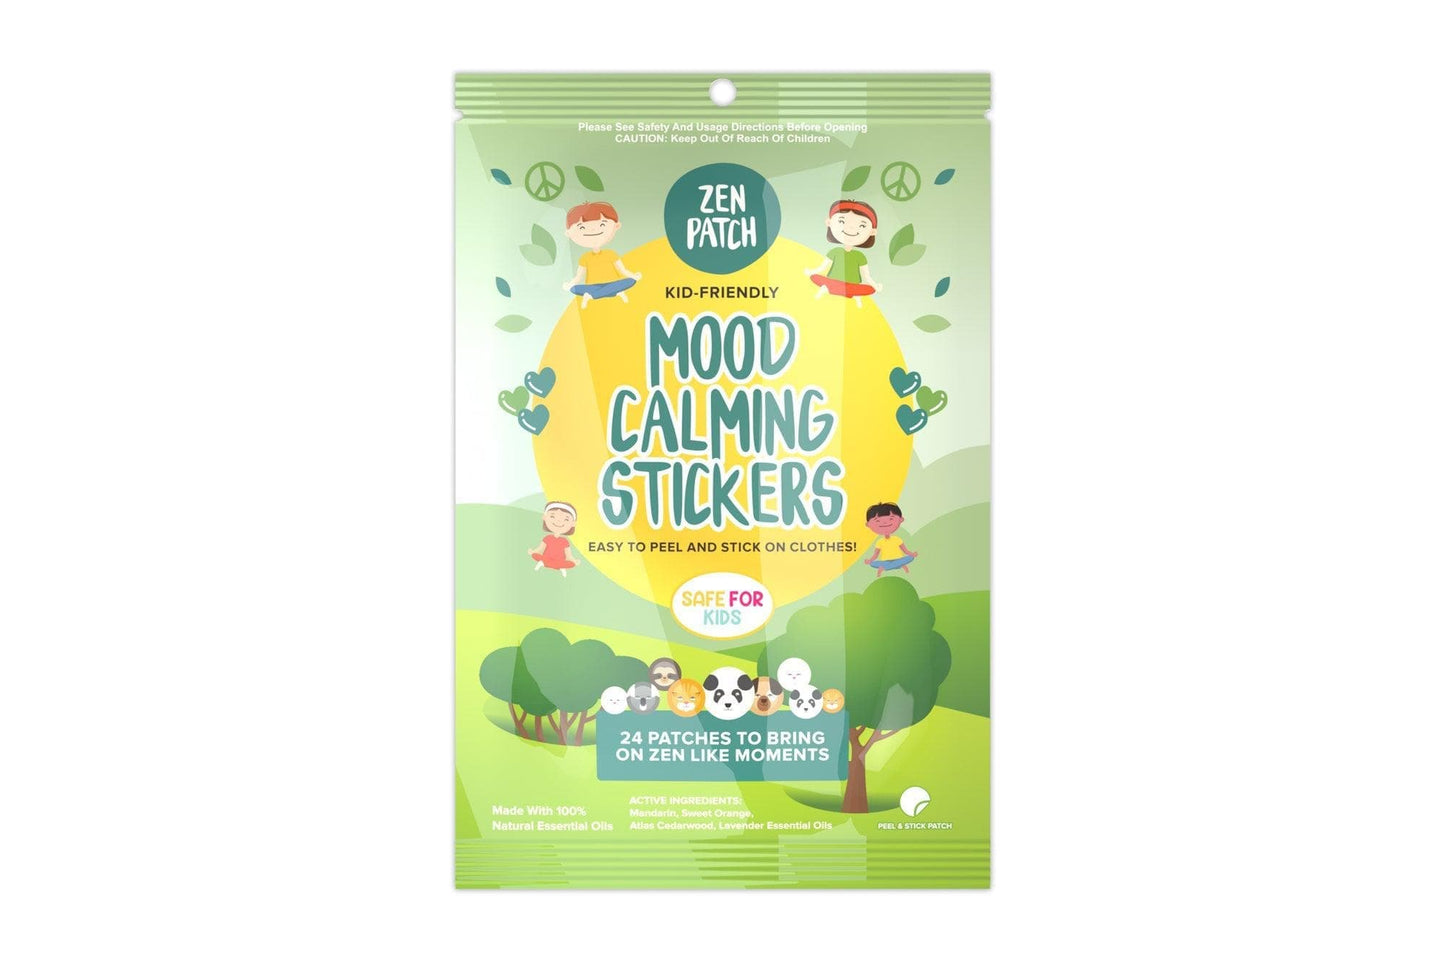 30 x ZenPatch Mood Calming Stickers individual resale packets in a Retail Display Box - AU